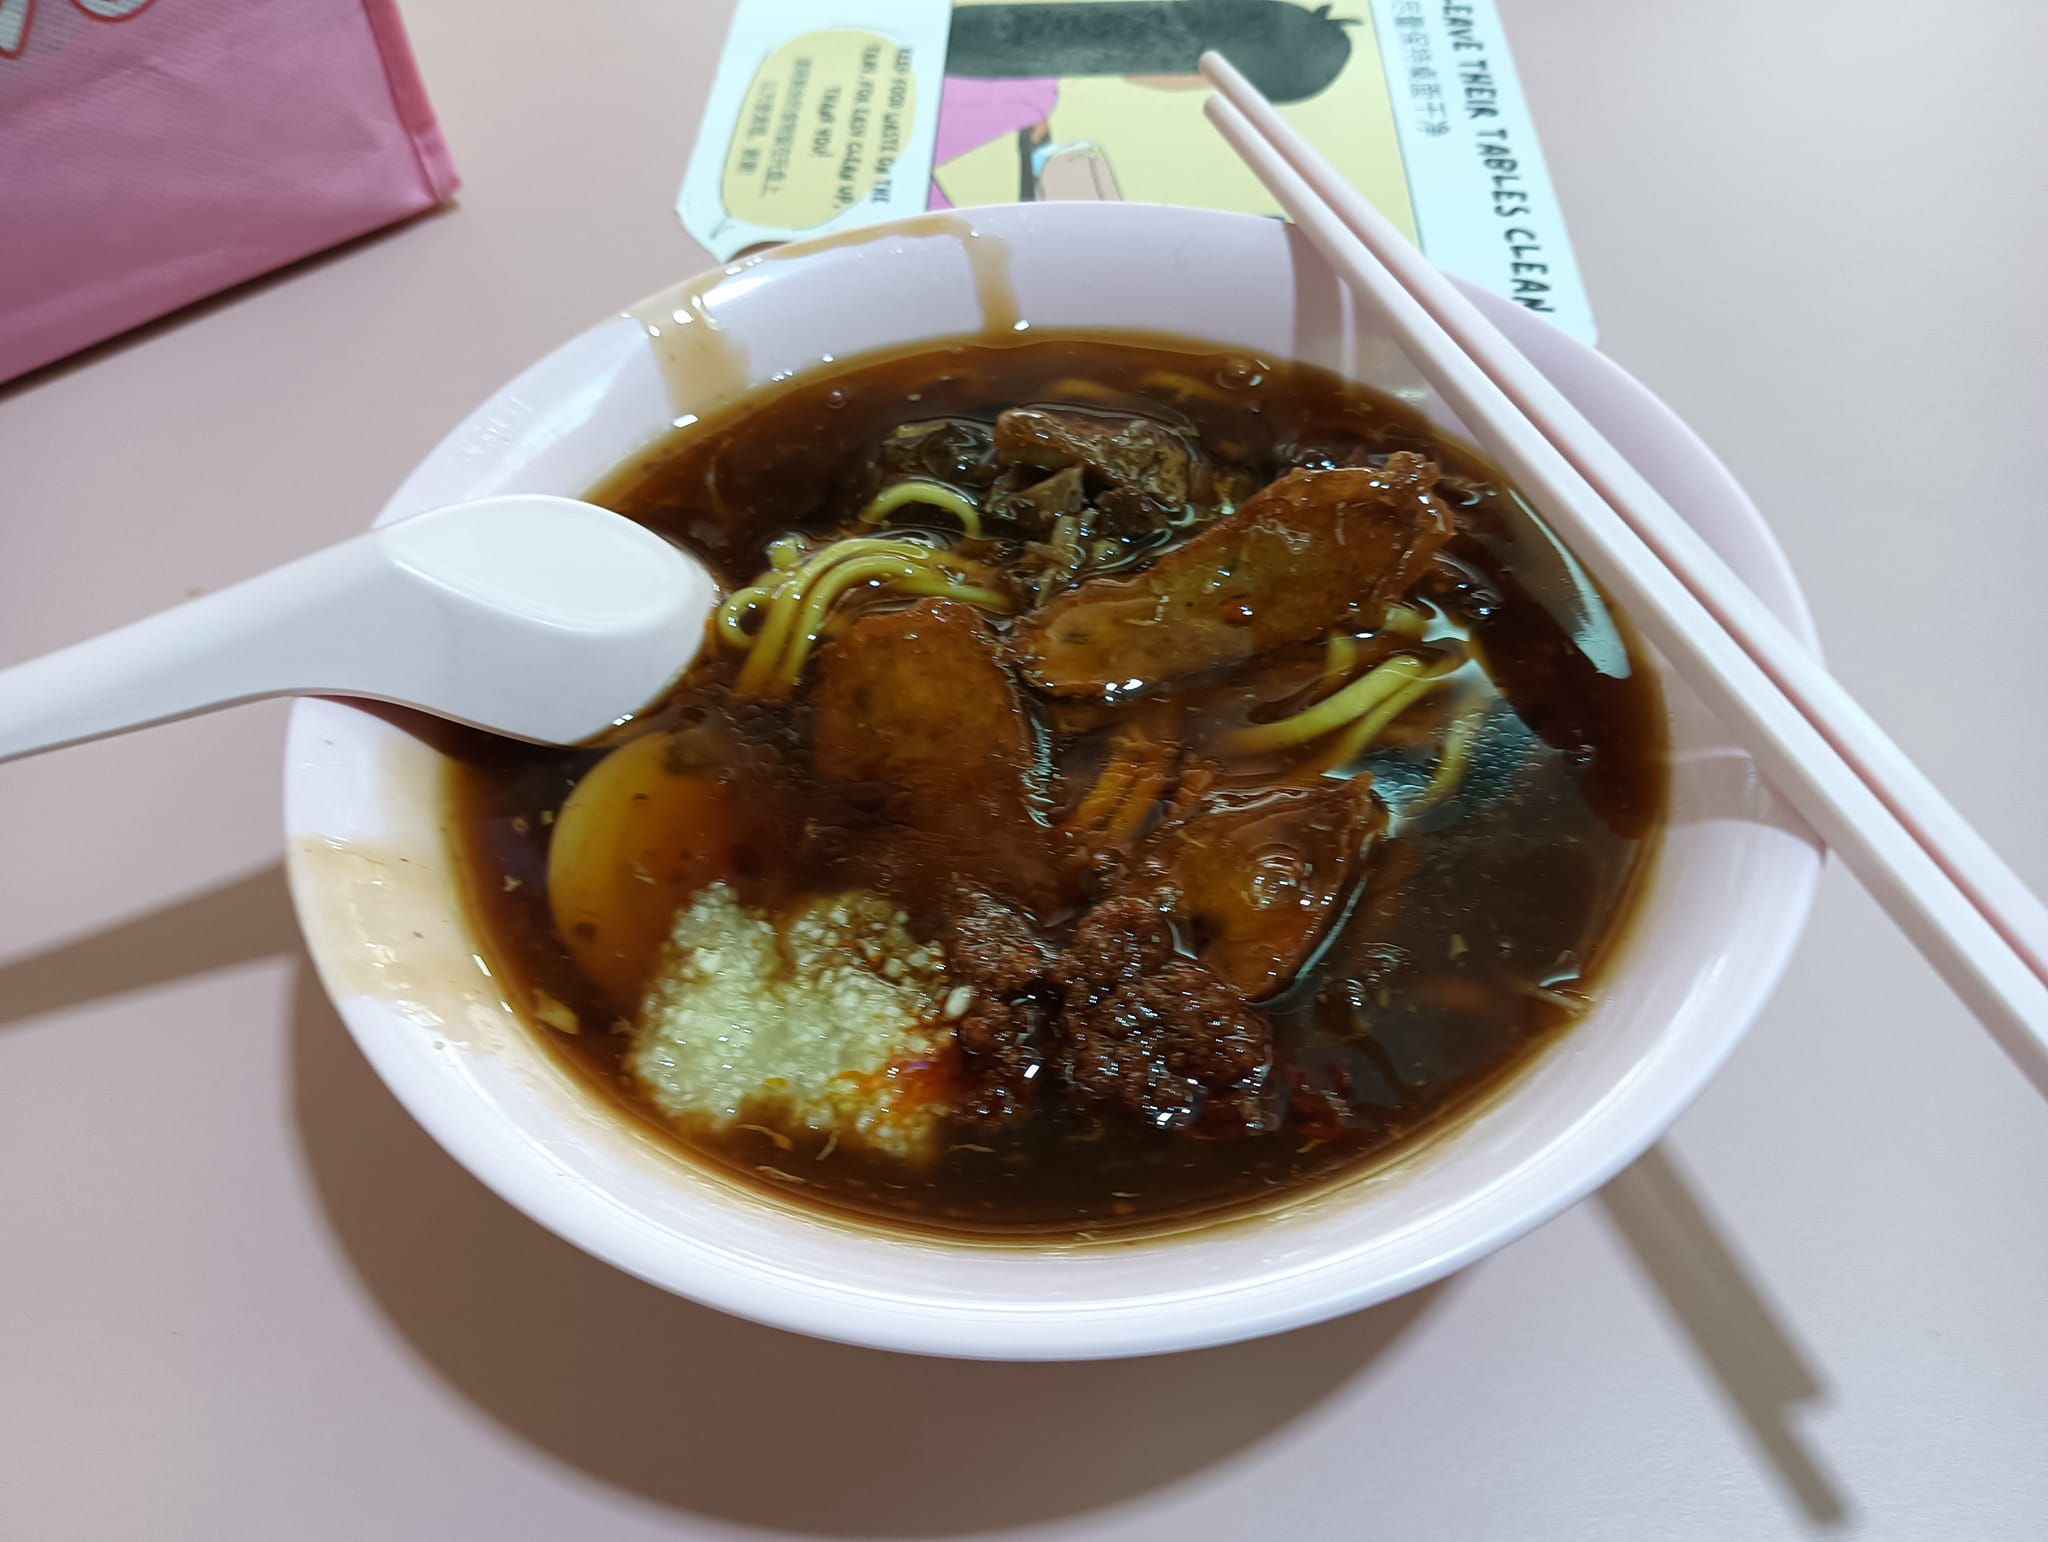 Toa Payoh Lorong 8 Hawker Centre Lor Mee